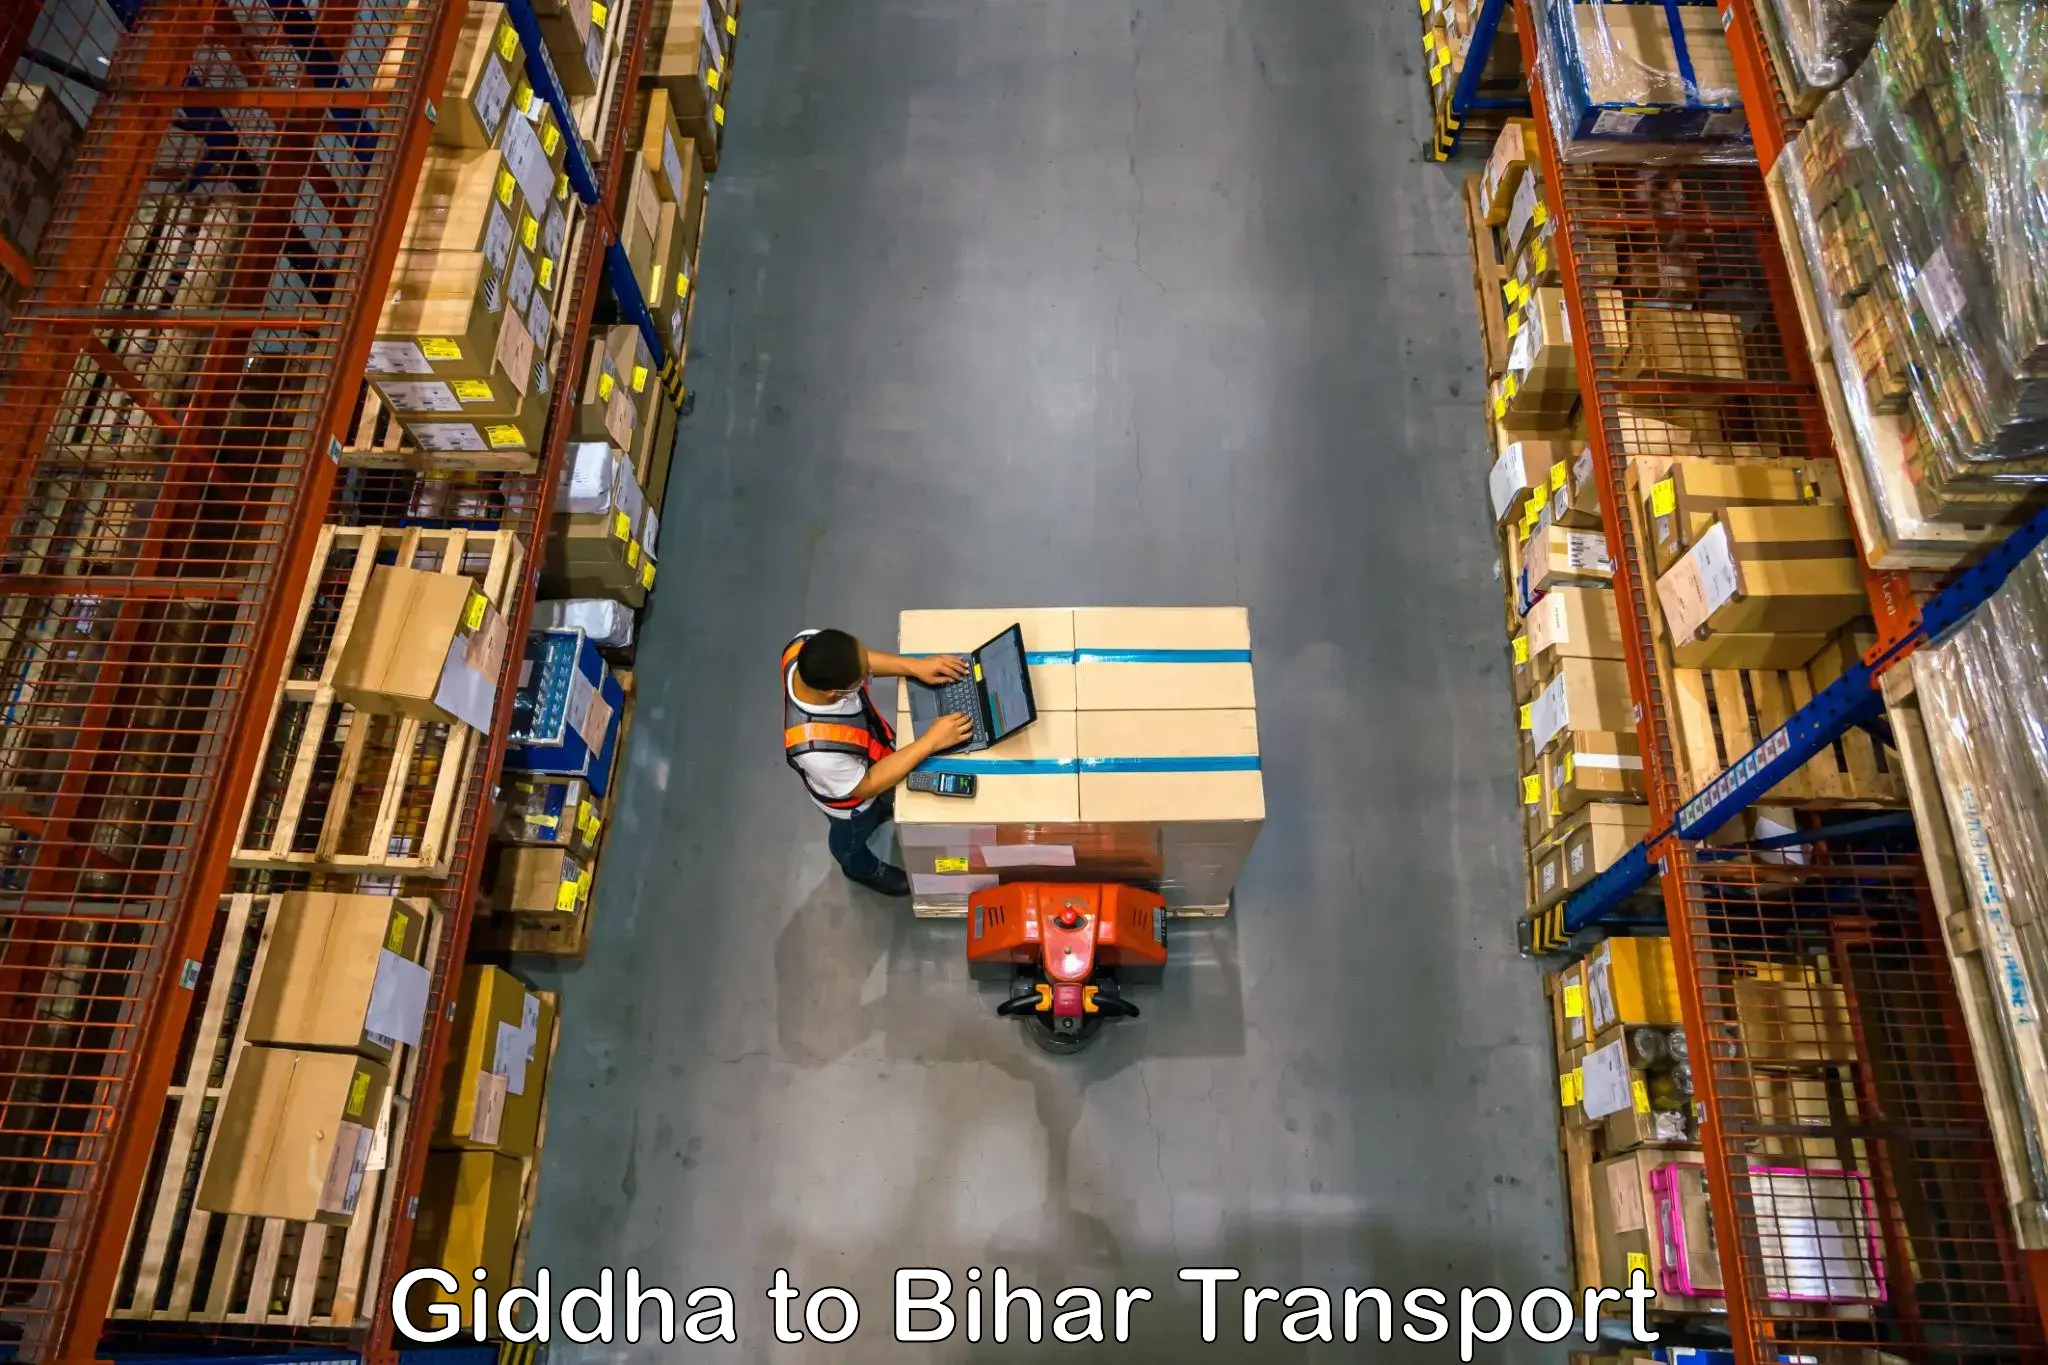 Part load transport service in India Giddha to Chainpur